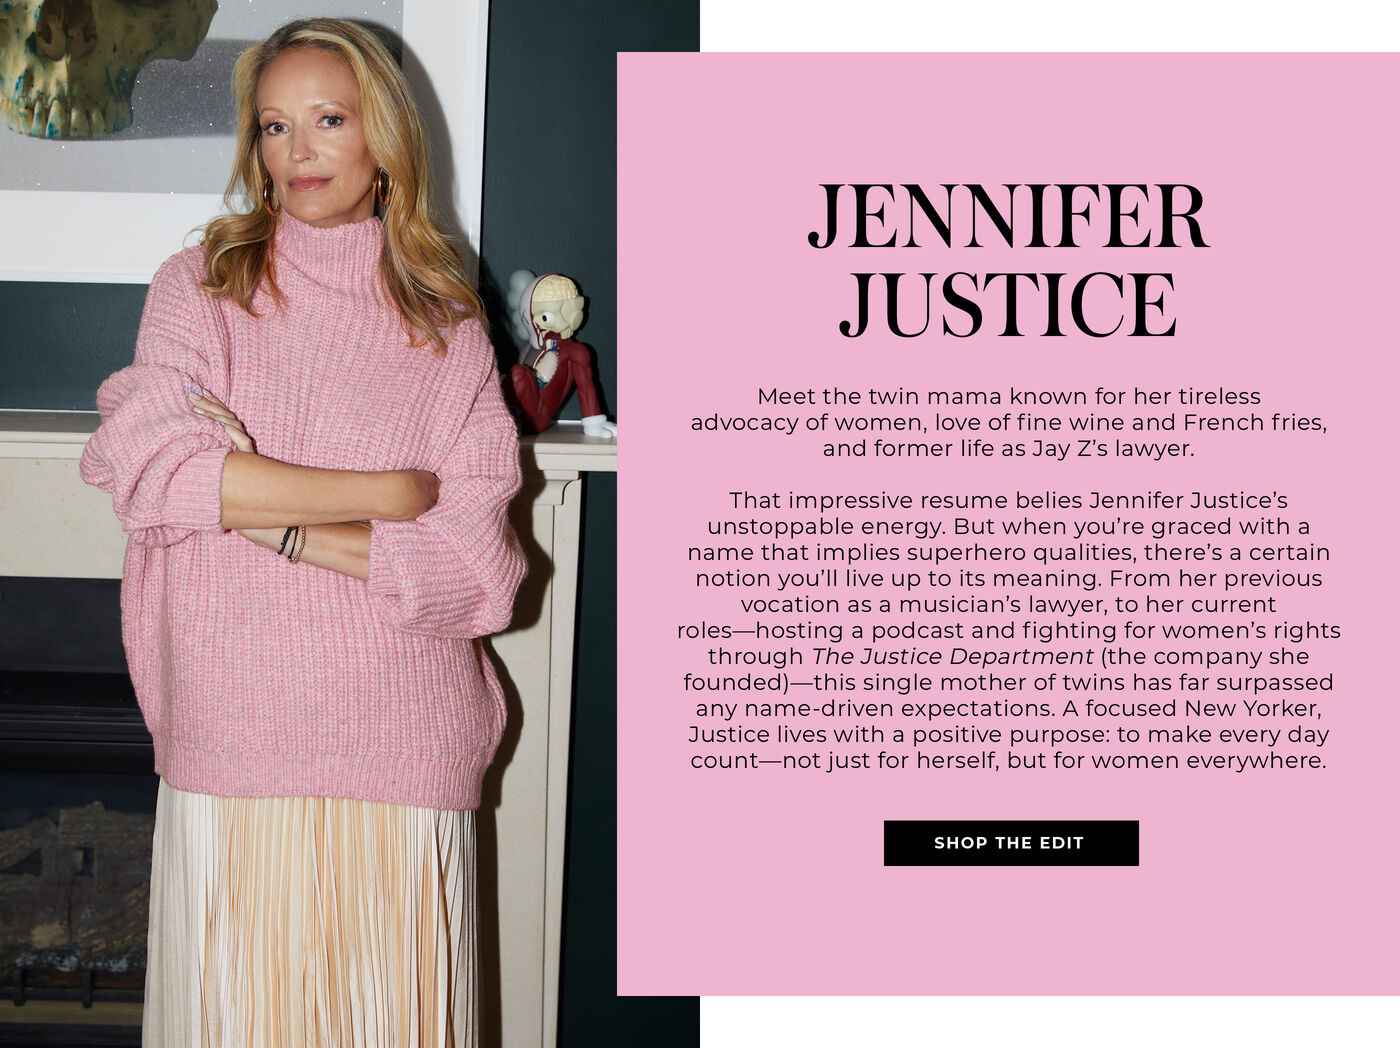 "JENNIFER JUSTICE MEET THE TWIN MAMA KNOWN FOR HER TIRELESS ADVOCACY OF WOMEN, LOVE OF FINE WINE AND FRENCH FRIES, AND FORMER LIFE AS JAY Z’s LAWYER. THAT IMPRESSIVE RESUME BELIES JENNIFER JUSTICE’S UNSTOPPABLE ENERGY. BUT WHEN YOU’RE GRACED WITH A NAME THAT IMPLIES SUPERHERO QUANLITIES, THERE’S A CERTAIN NOTION YOU’LL LIVE UP TO ITS MEANING. FROM HER PREVIOUS VOCATION AS A MUSICIAN’S LAWYER, TO HER CURRENT ROLES-HOSTING A PODCAST AND FIGHTING FOR WOMEN’S RIGHTS THROUGH THE JUSTICE DEPARTMENT (THE COMPANY SHE FOUNDED)-THIS SINGLE MOTHER OF TWINS HAS FAR SURPASSED ANY NAME-DRIVEN EXPECTATIONS. A FOCUSED NEW YORKER, JUSTICE LIVES WITH A POSITIVE PURPOSE: TO MAKE EVERY DAY COUNT-NOT JUST FOR HERSELF, BUT FOR WOMEN EVERYWHERE. "